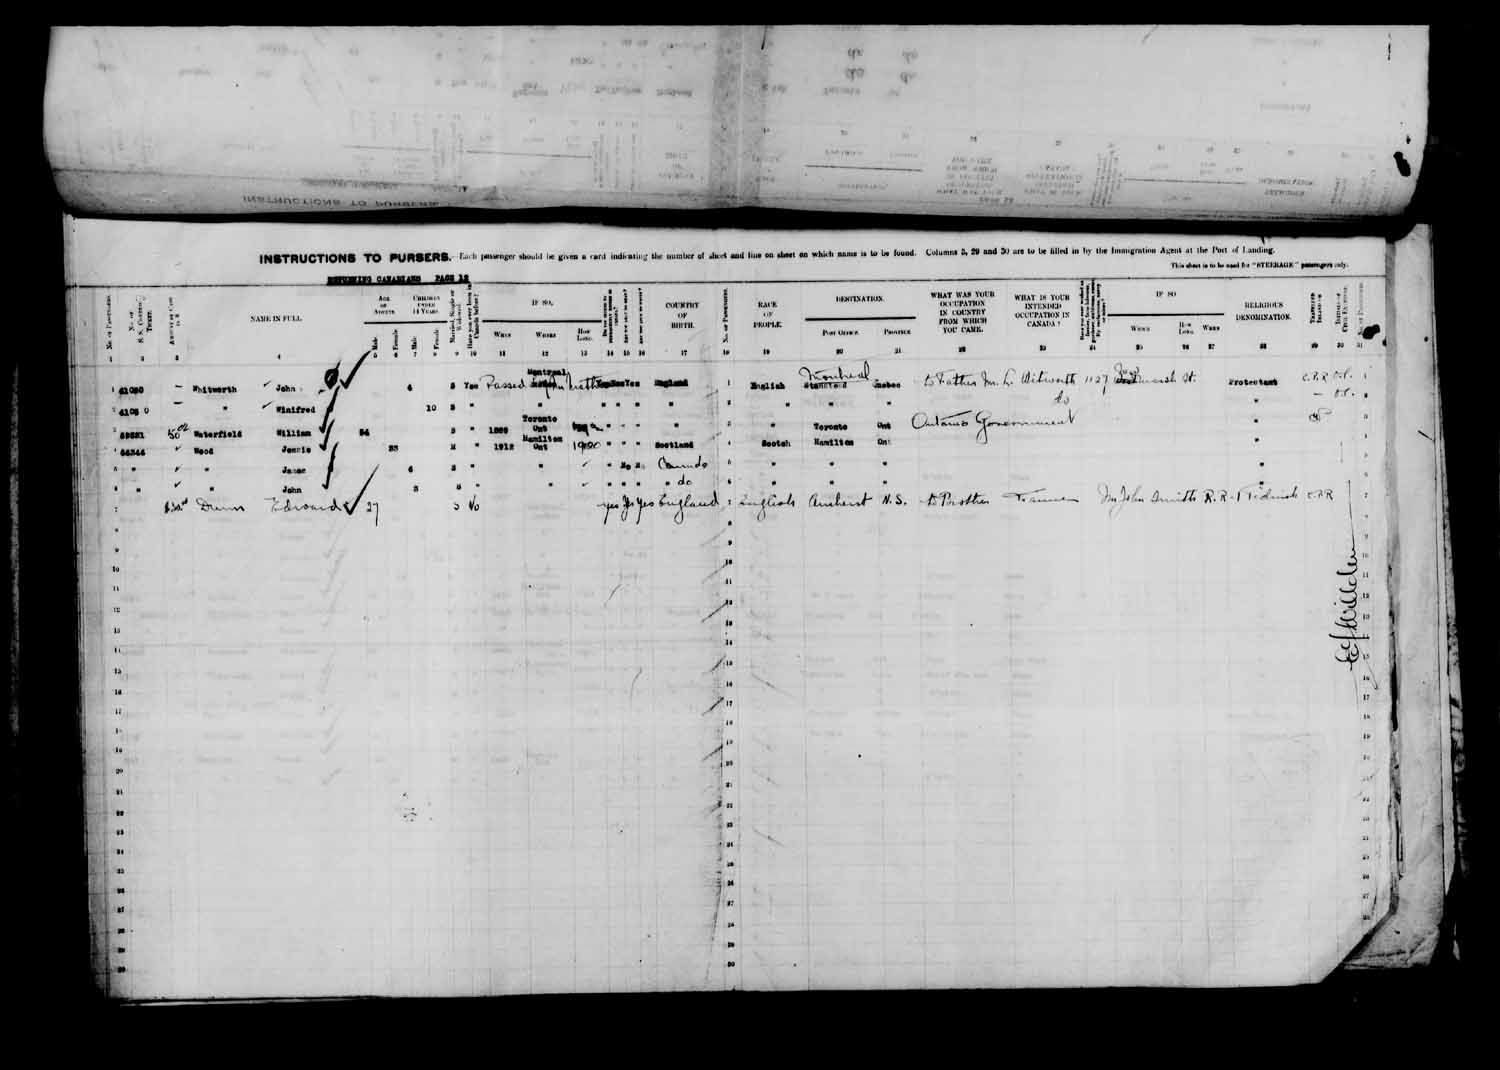 Digitized page of Passenger Lists for Image No.: e003610639